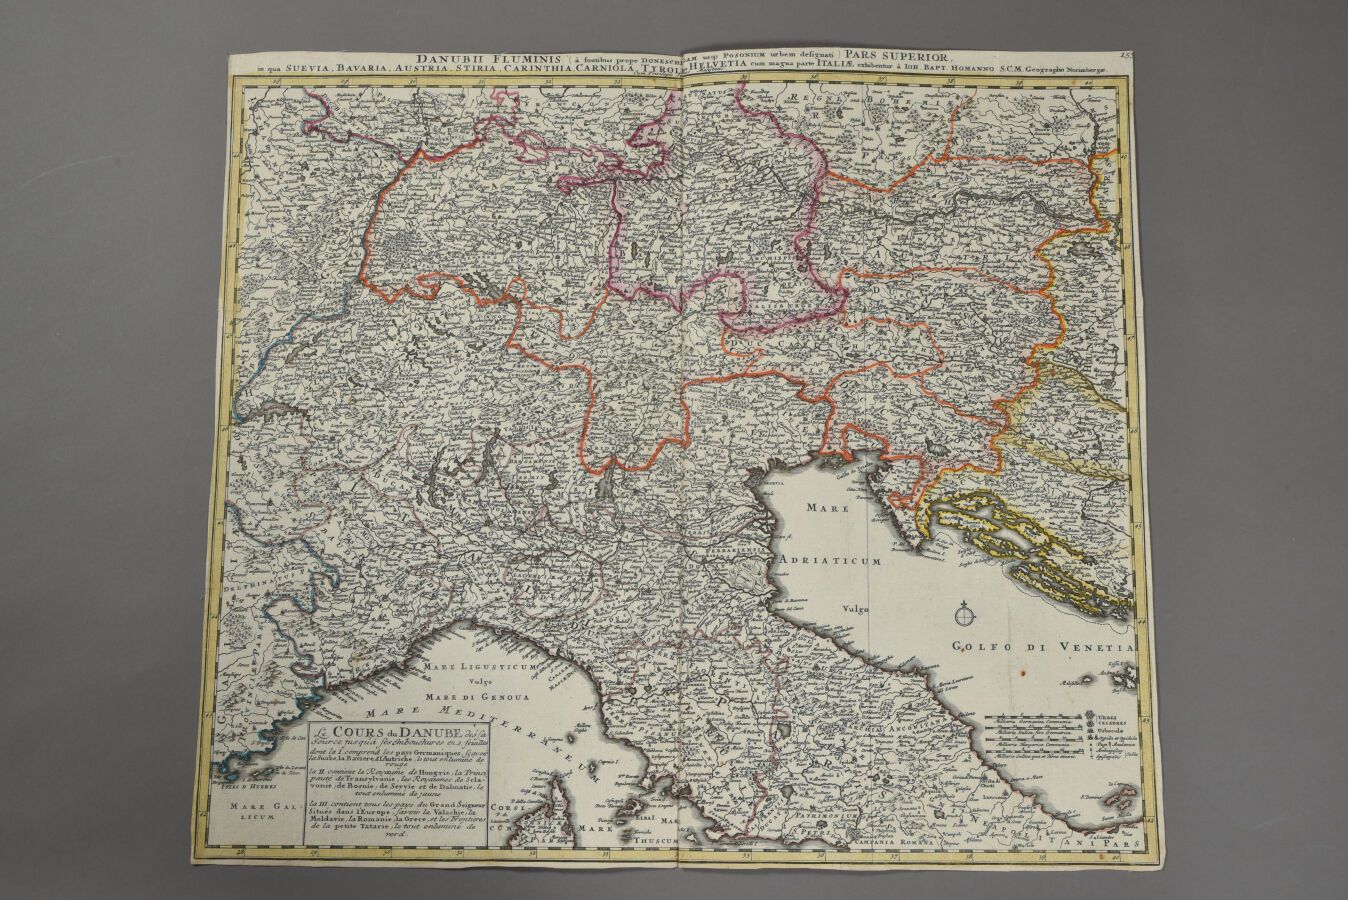 Null Jean-Baptiste HOMANN (Germany 1664 - 1724)
Map of the upper reaches of the &hellip;